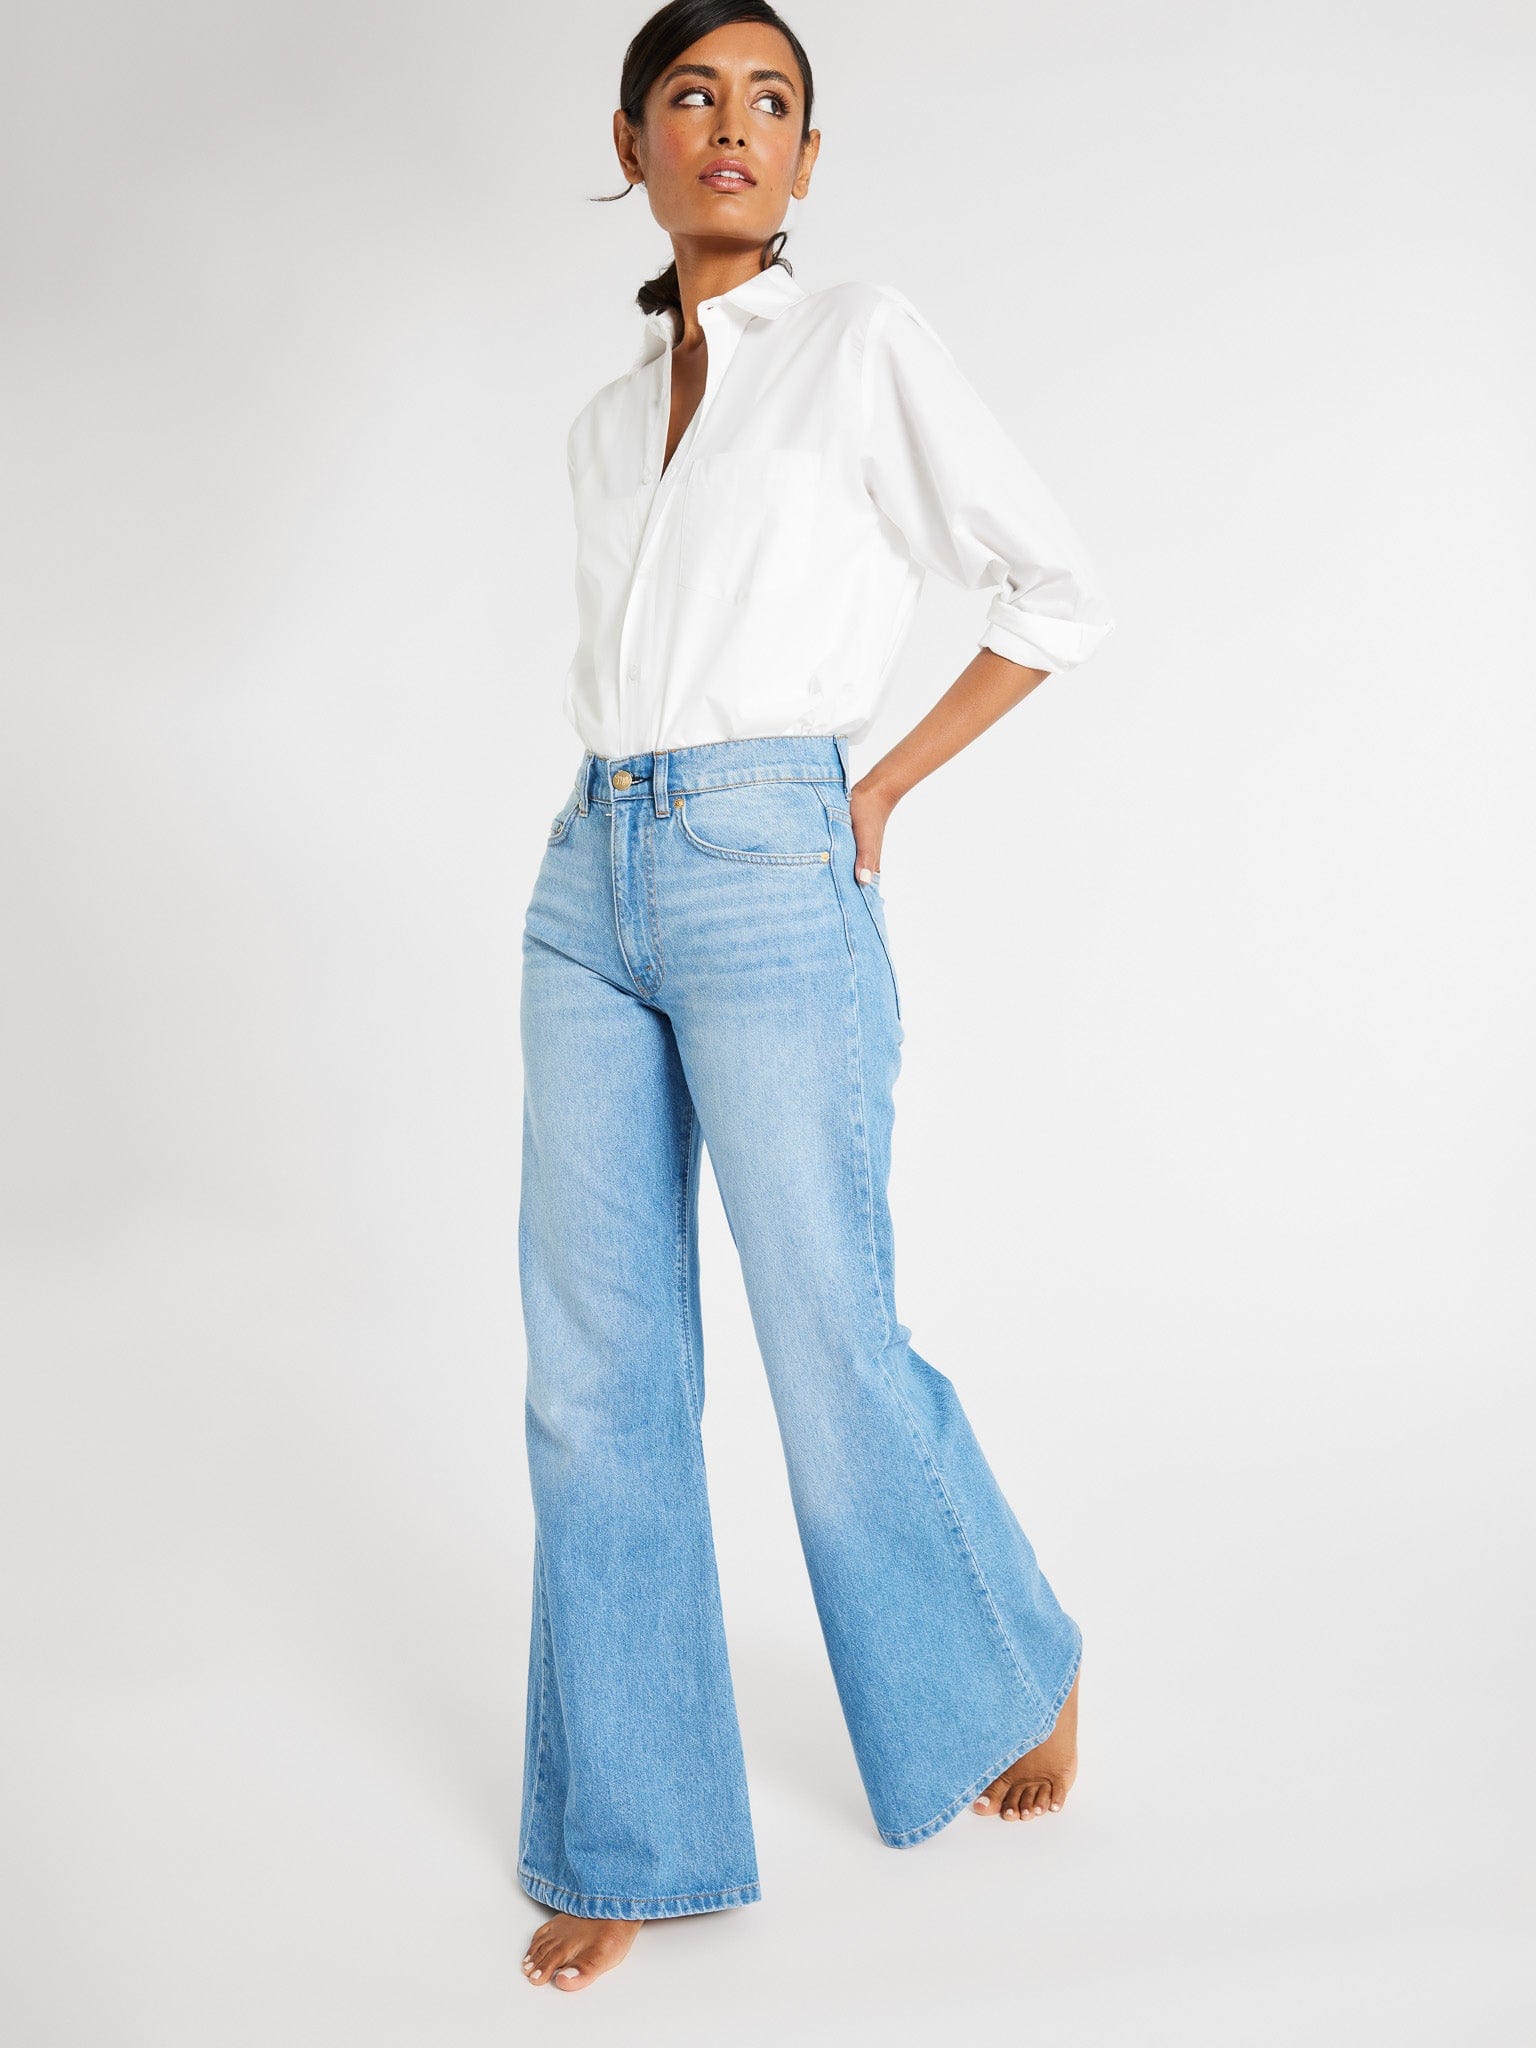 Women's Flare Jeans, Flared fit